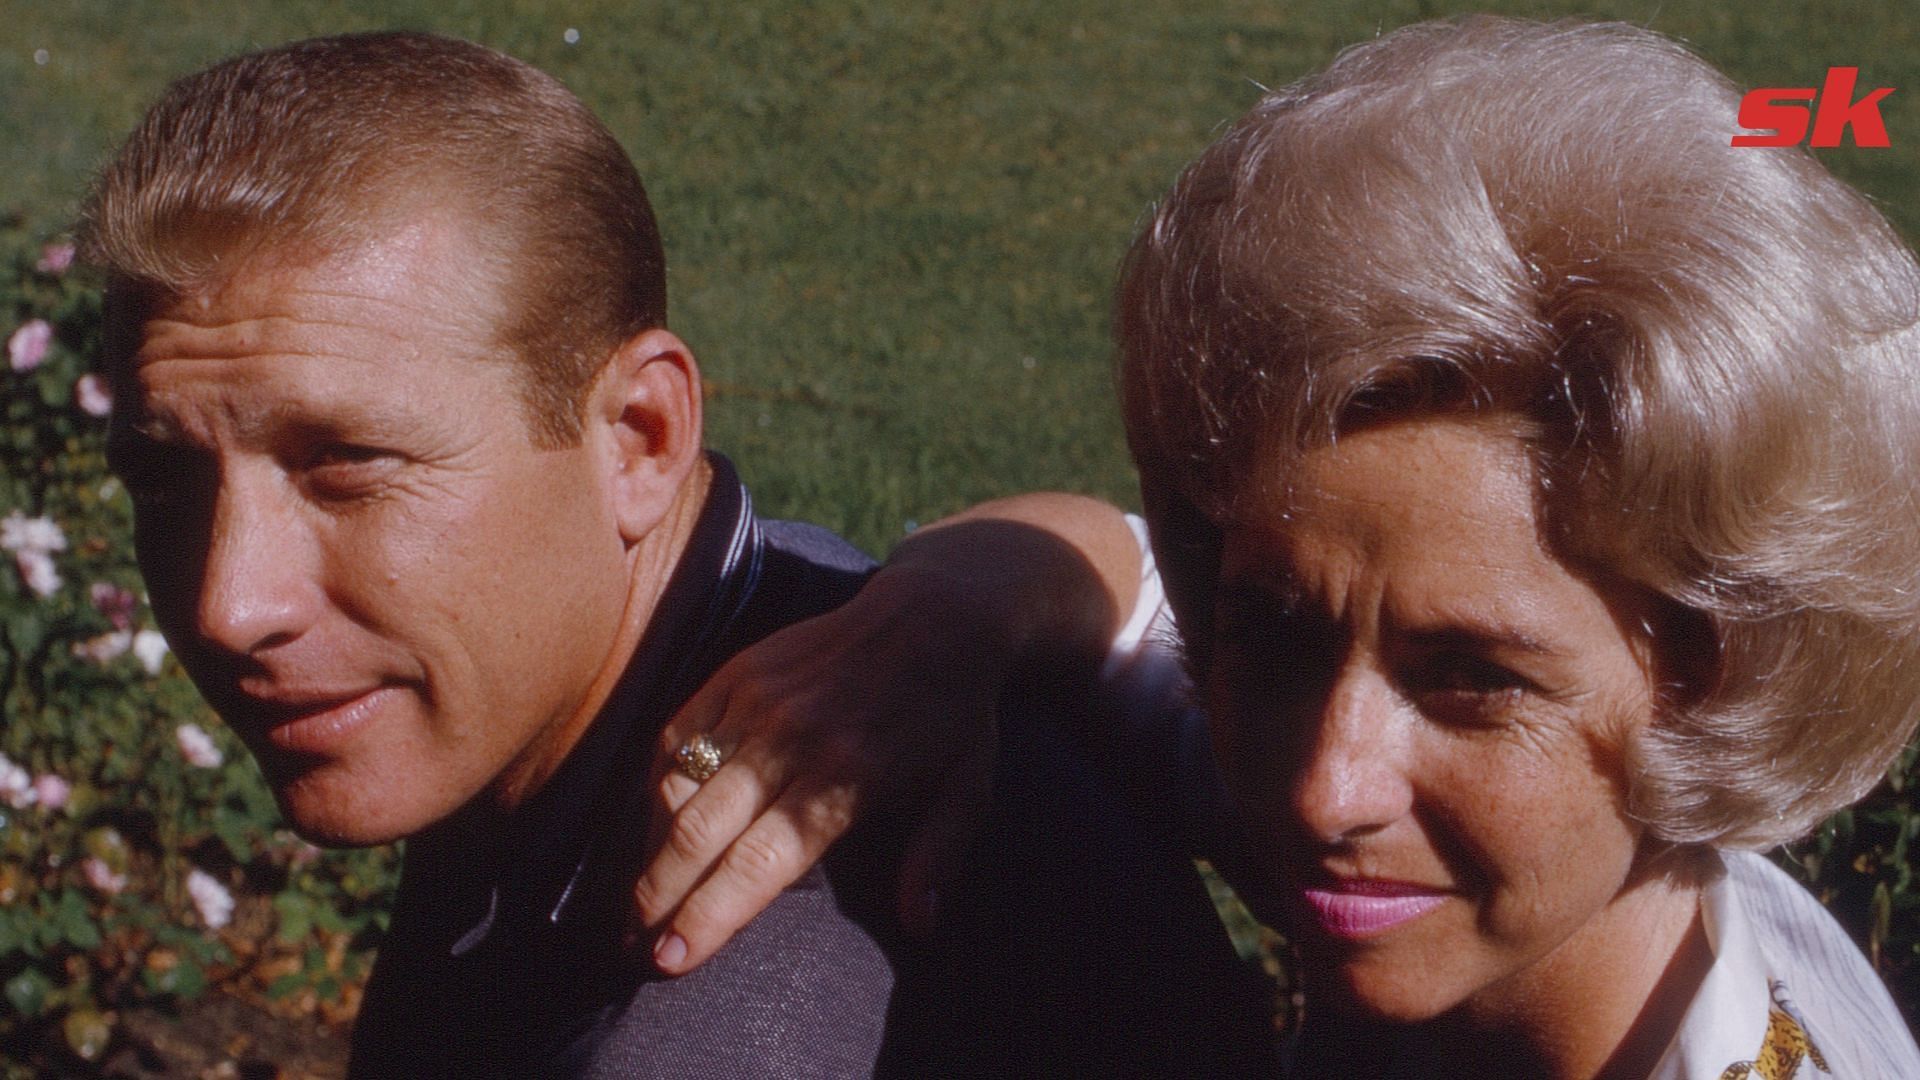 When late New York Yankees legend Mickey Mantle's widow revealed being  disrespected behind closed doors